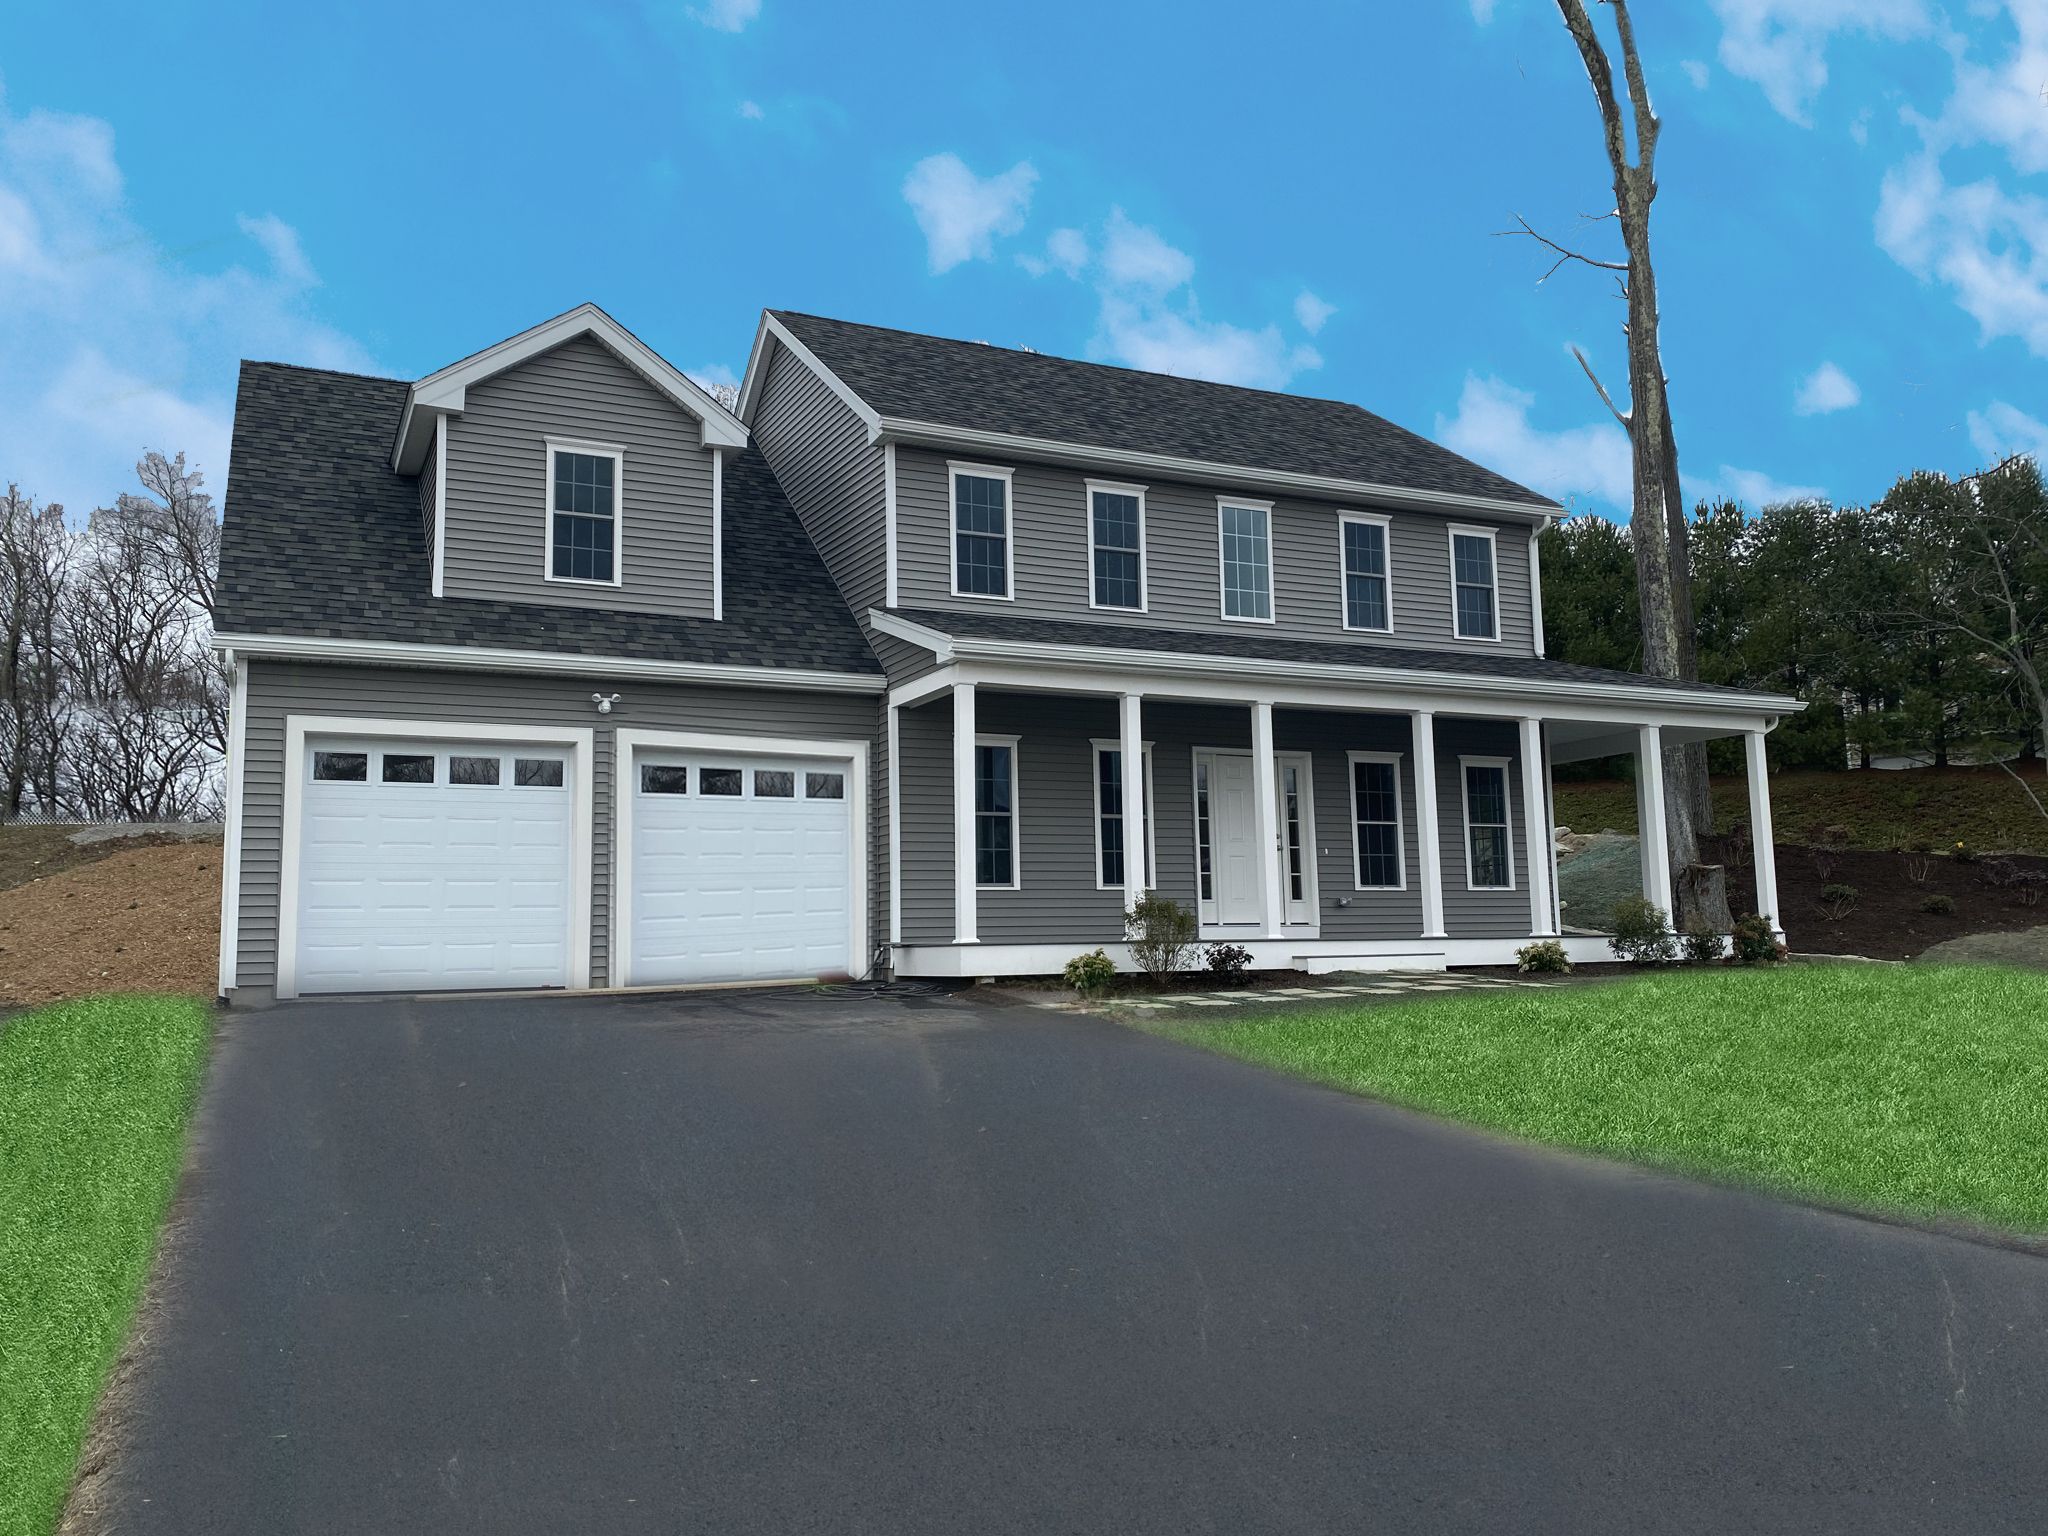 Villages of the Americas-Uxbridge, New Homes starting construcion NOW from $519,990